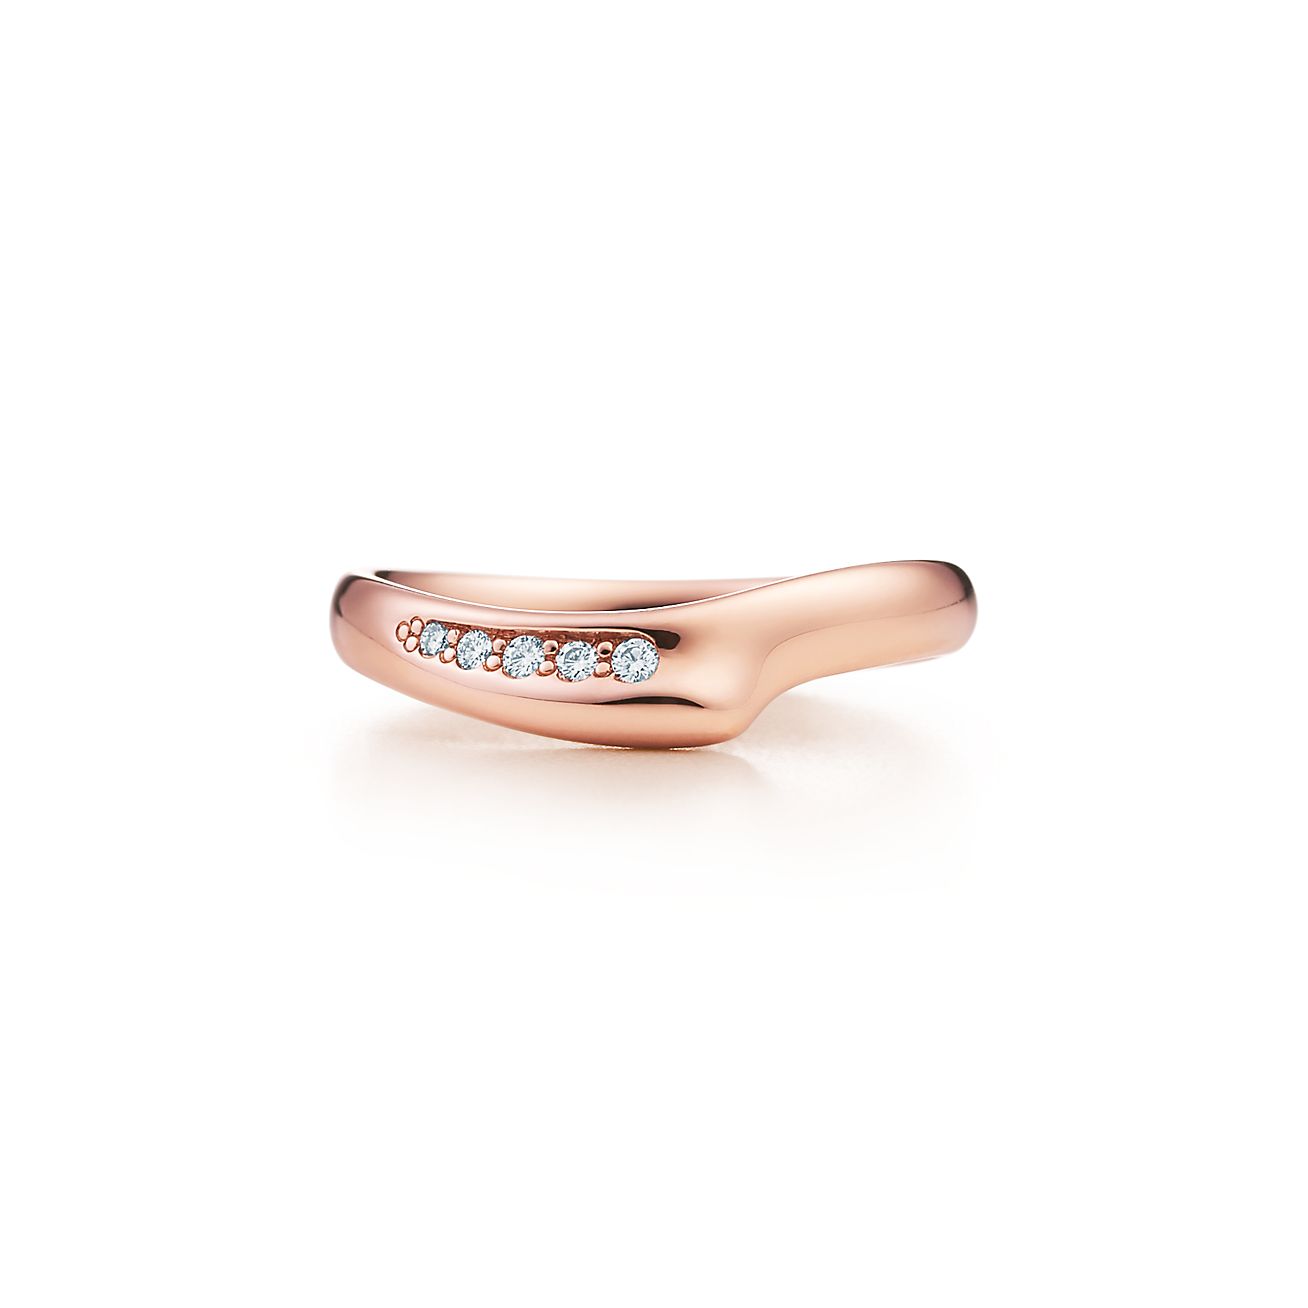 Elsa Peretti® Open Heart band ring in 18k rose gold with diamonds